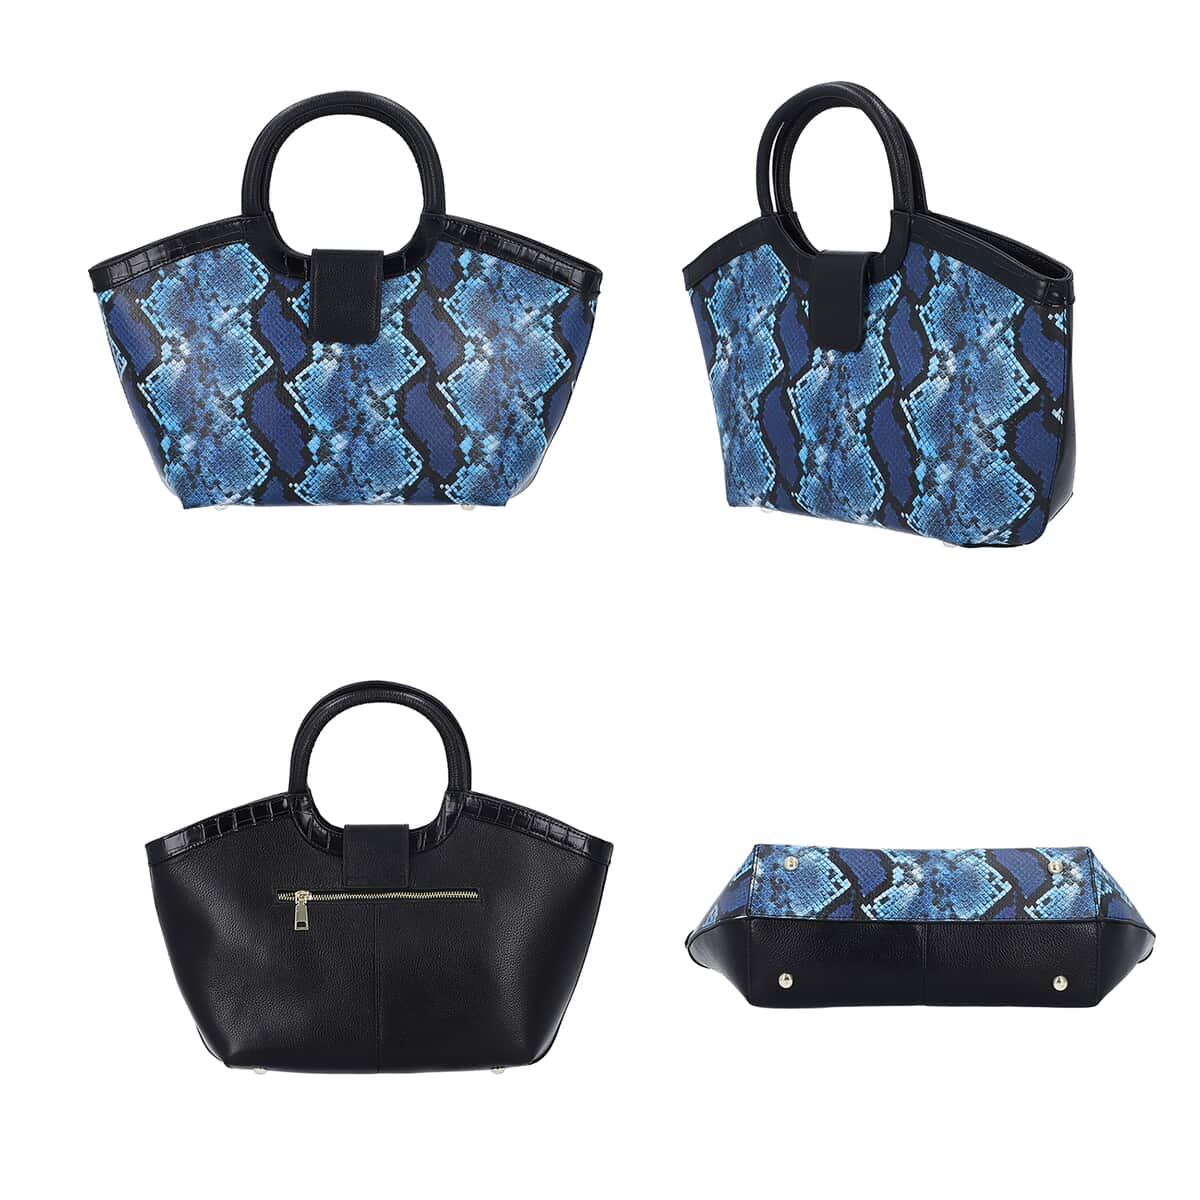 Hong Kong Closed Out Collection Black and Blue Snake Print Pattern Genuine Leather Tote Bag (10.5"x16"x5x8.66") with Handle and Shoulder Straps image number 2